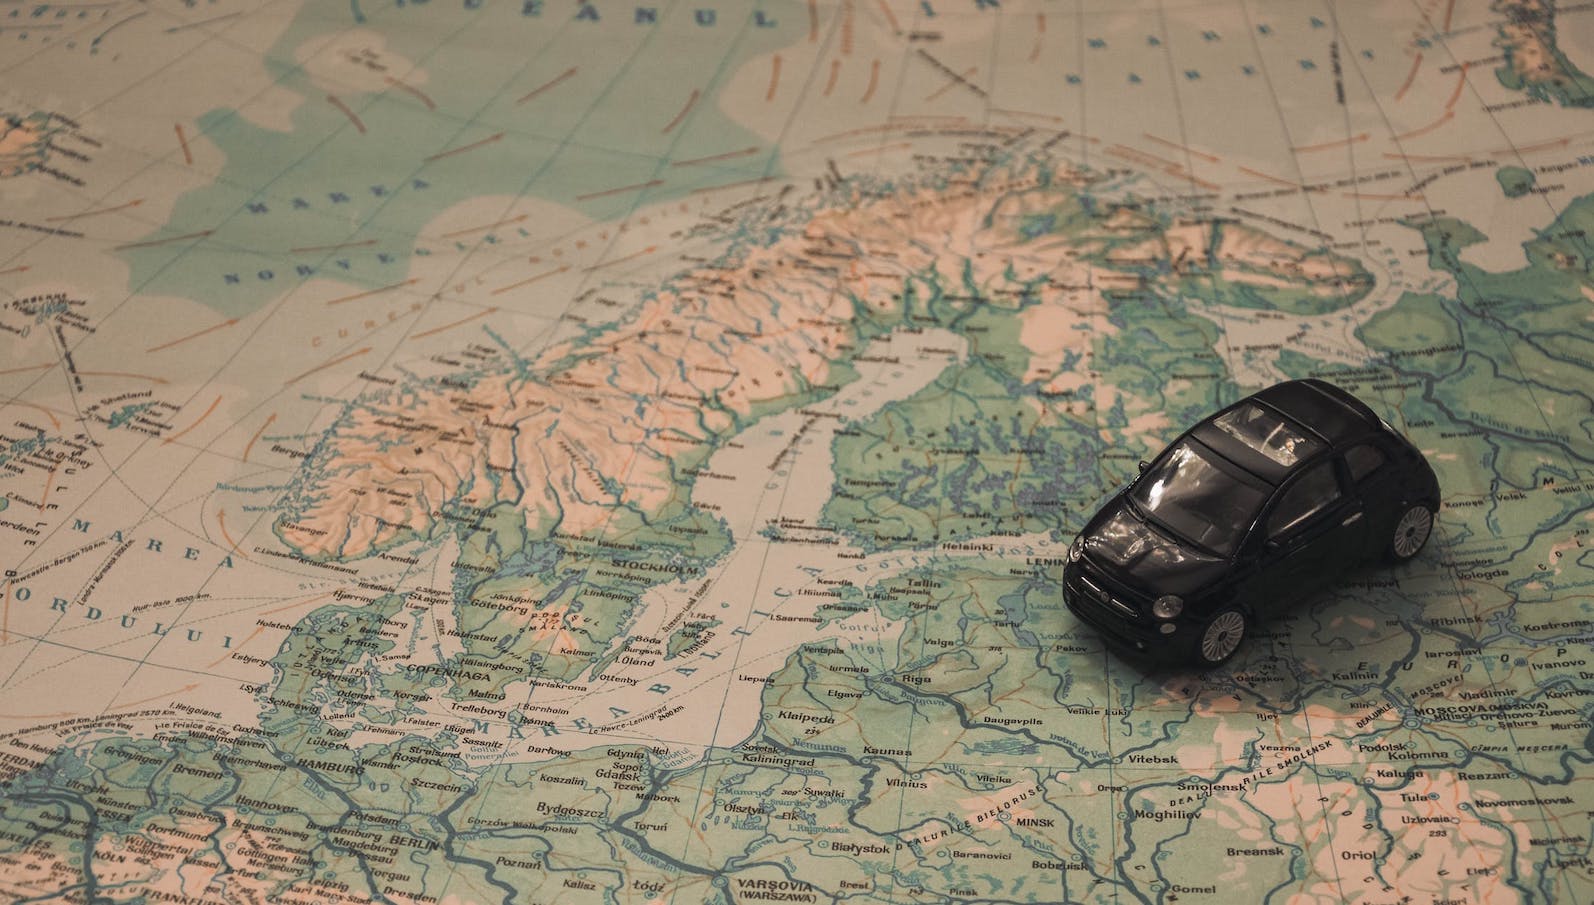 Black toy car atop a map of the world zoomed in